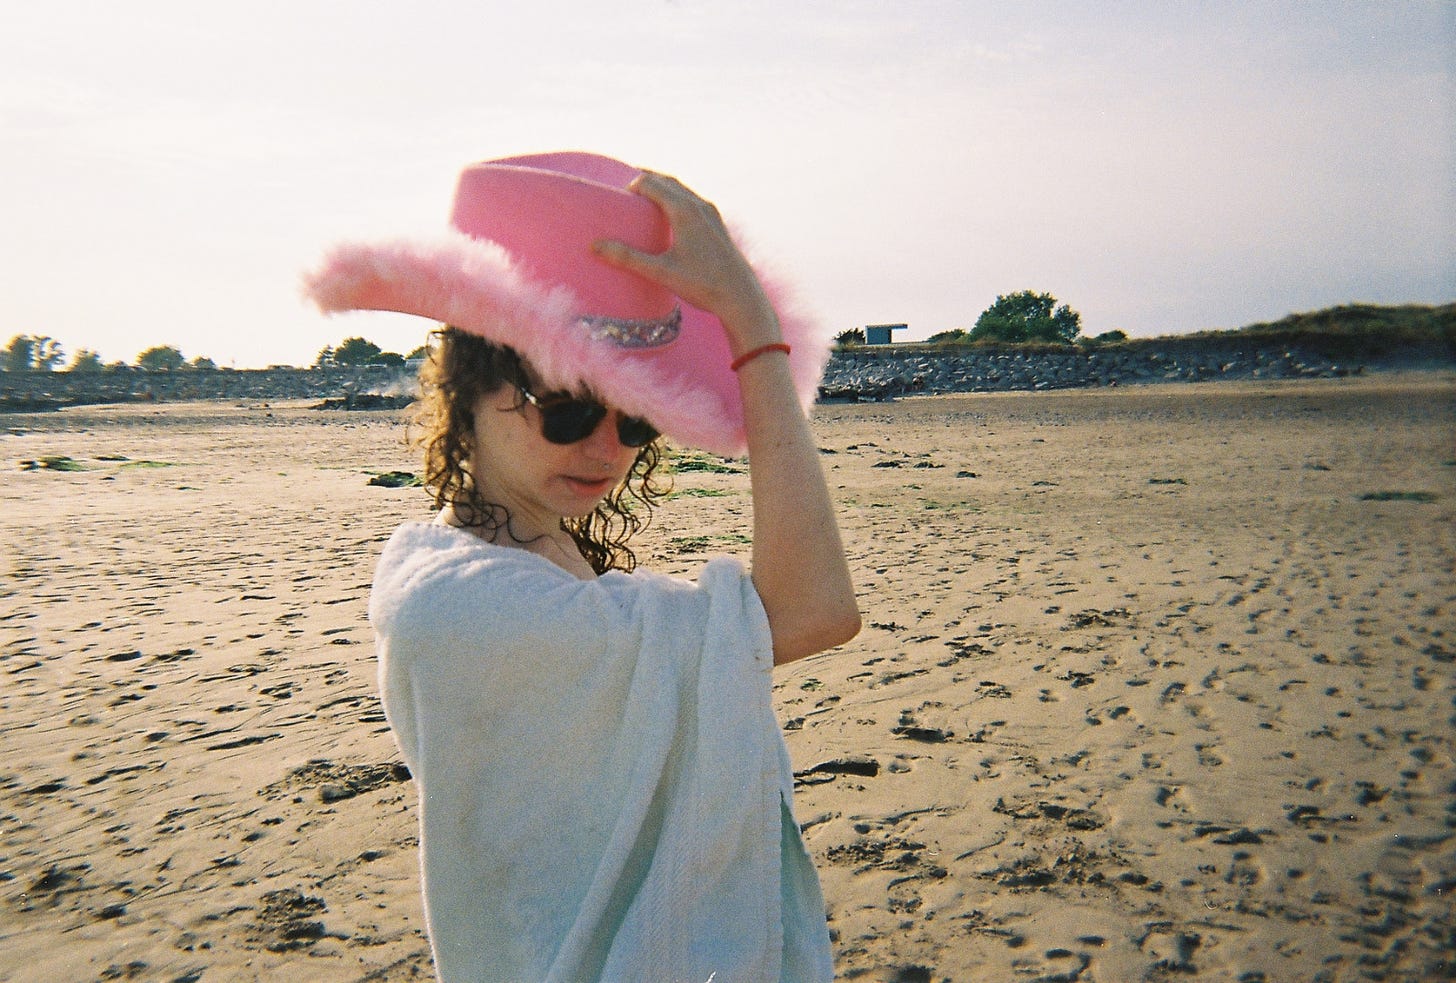 Photo of a person standing on a beach. They are a white femme presenting person, in the middle of the frame, wearing a pink cowboy hat and sunglasses, wrapped in a towel. Their hand is on the top of their hat like they are about to cock it in a sort of ‘howdy’ way. Behind them is sand and a line of trees on the horizon. 